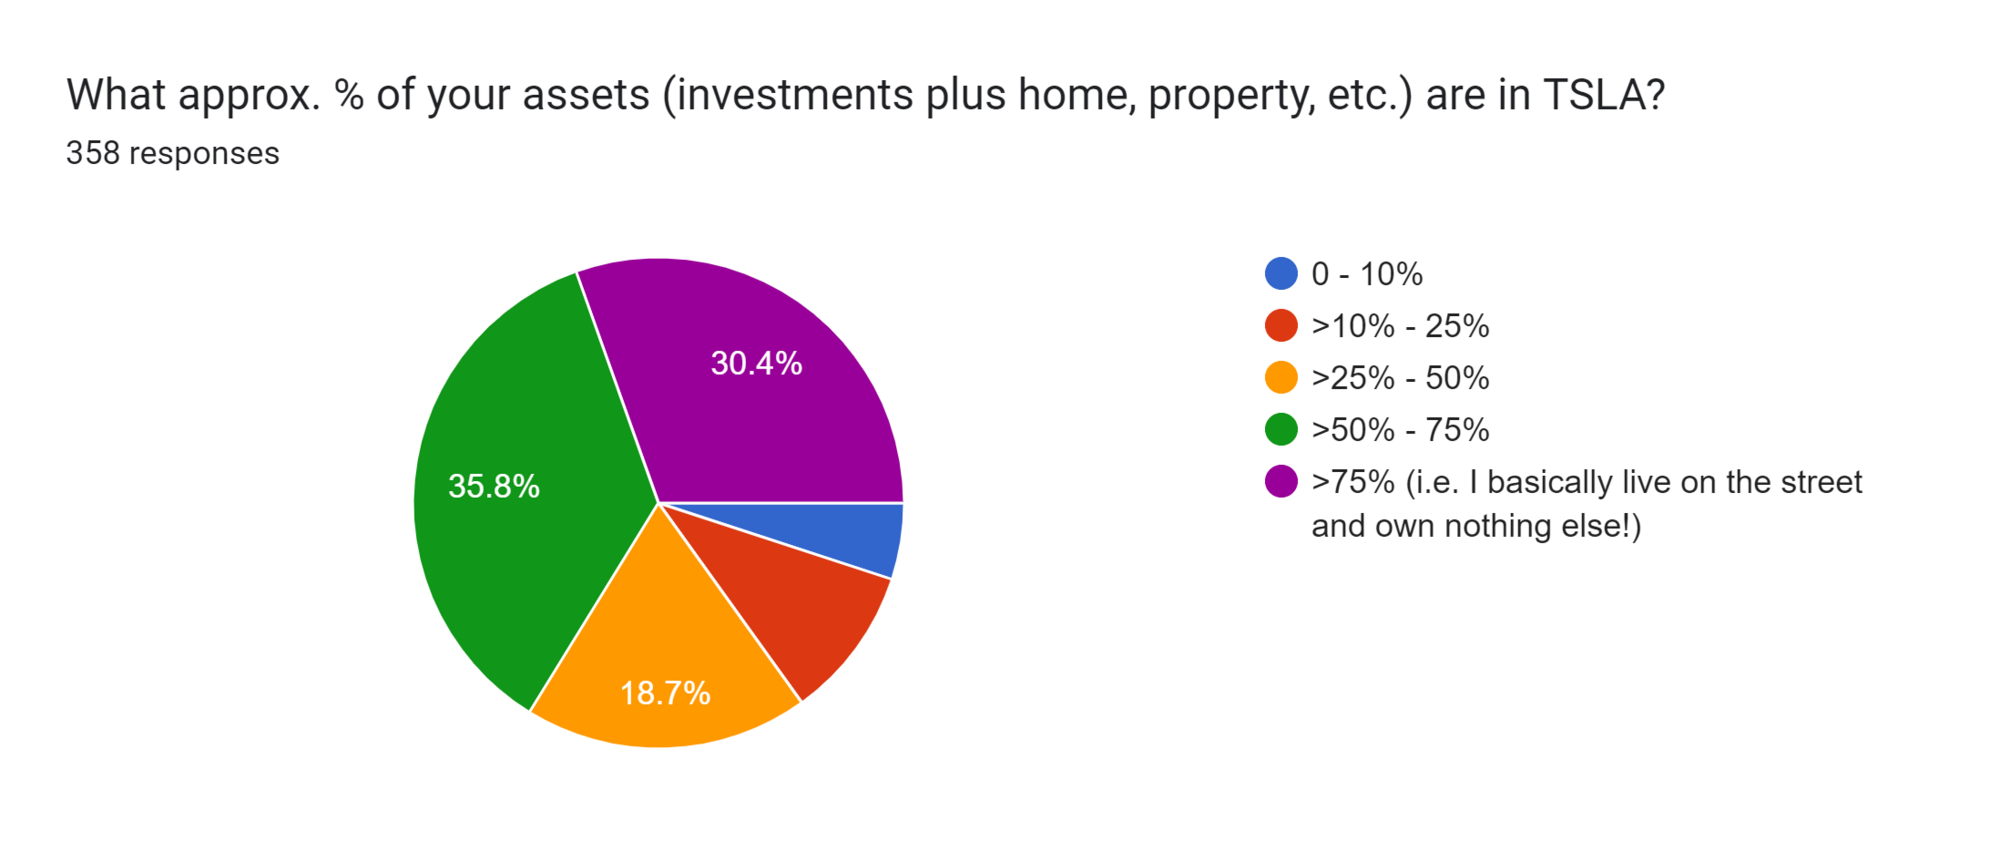 Forms response chart. Question title: What approx. % of your assets (investments plus home, property, etc.) are in TSLA?. Number of responses: 358 responses.